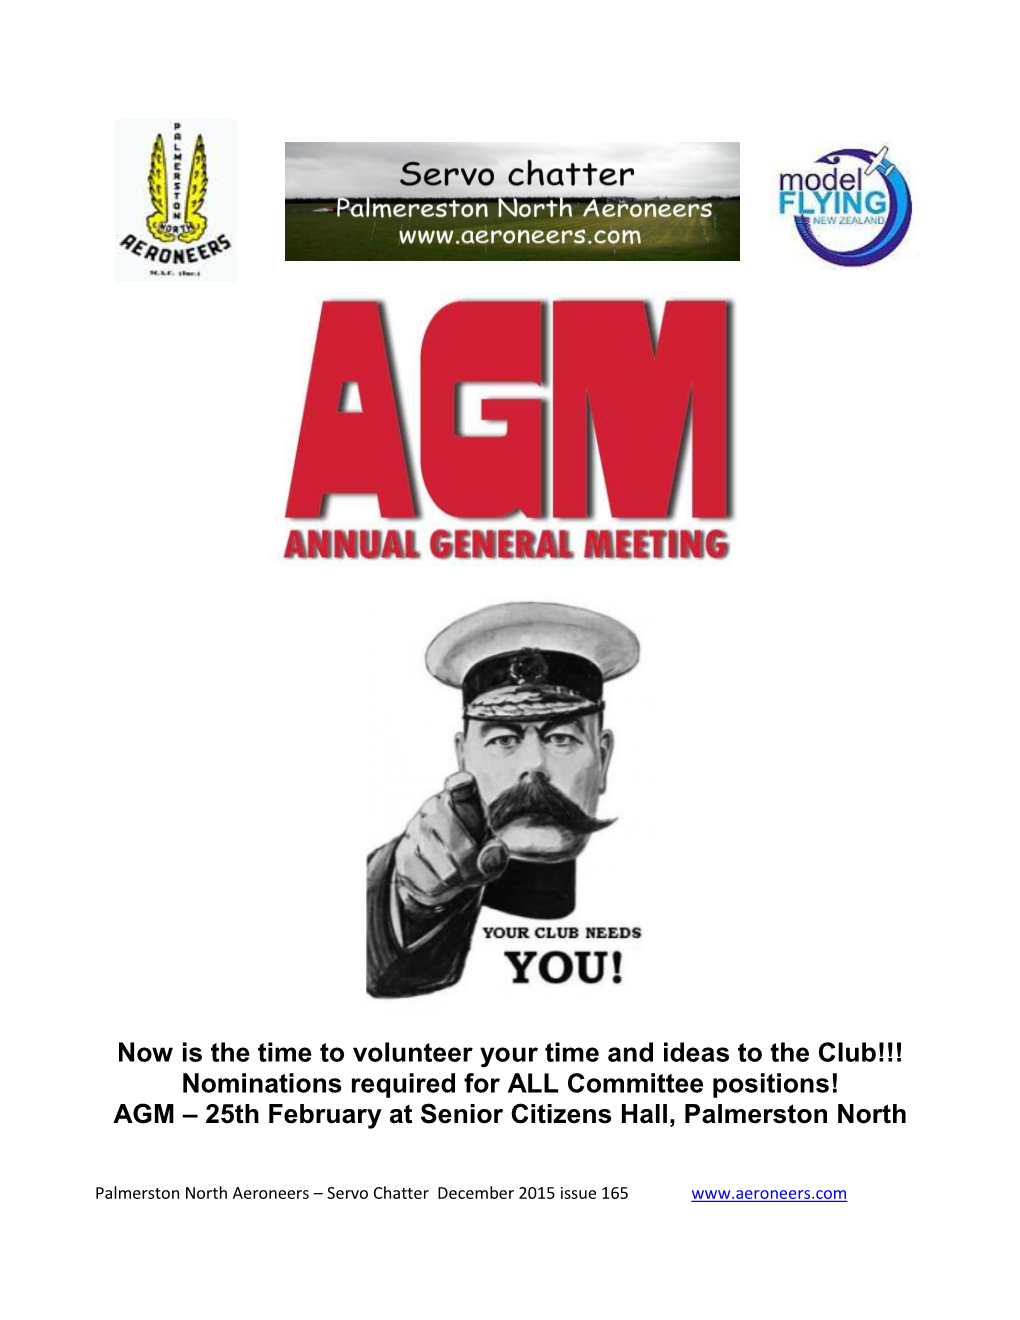 Now Is the Time to Volunteer Your Time and Ideas to the Club!!! Nominations Required for ALL Committee Positions! AGM – 25Th F